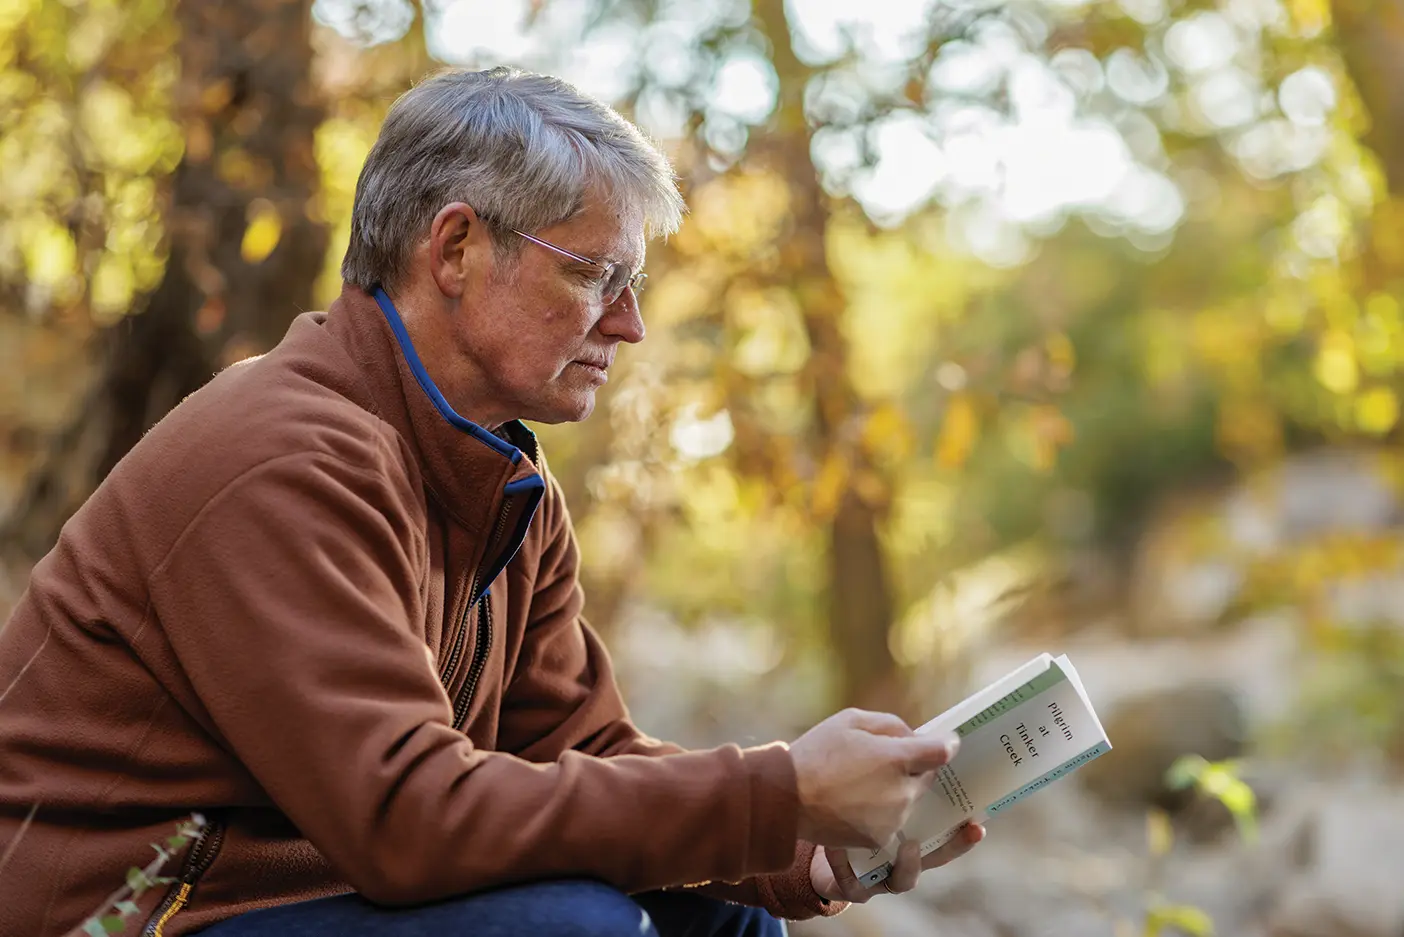 A man contemplates as he reads a book in nature